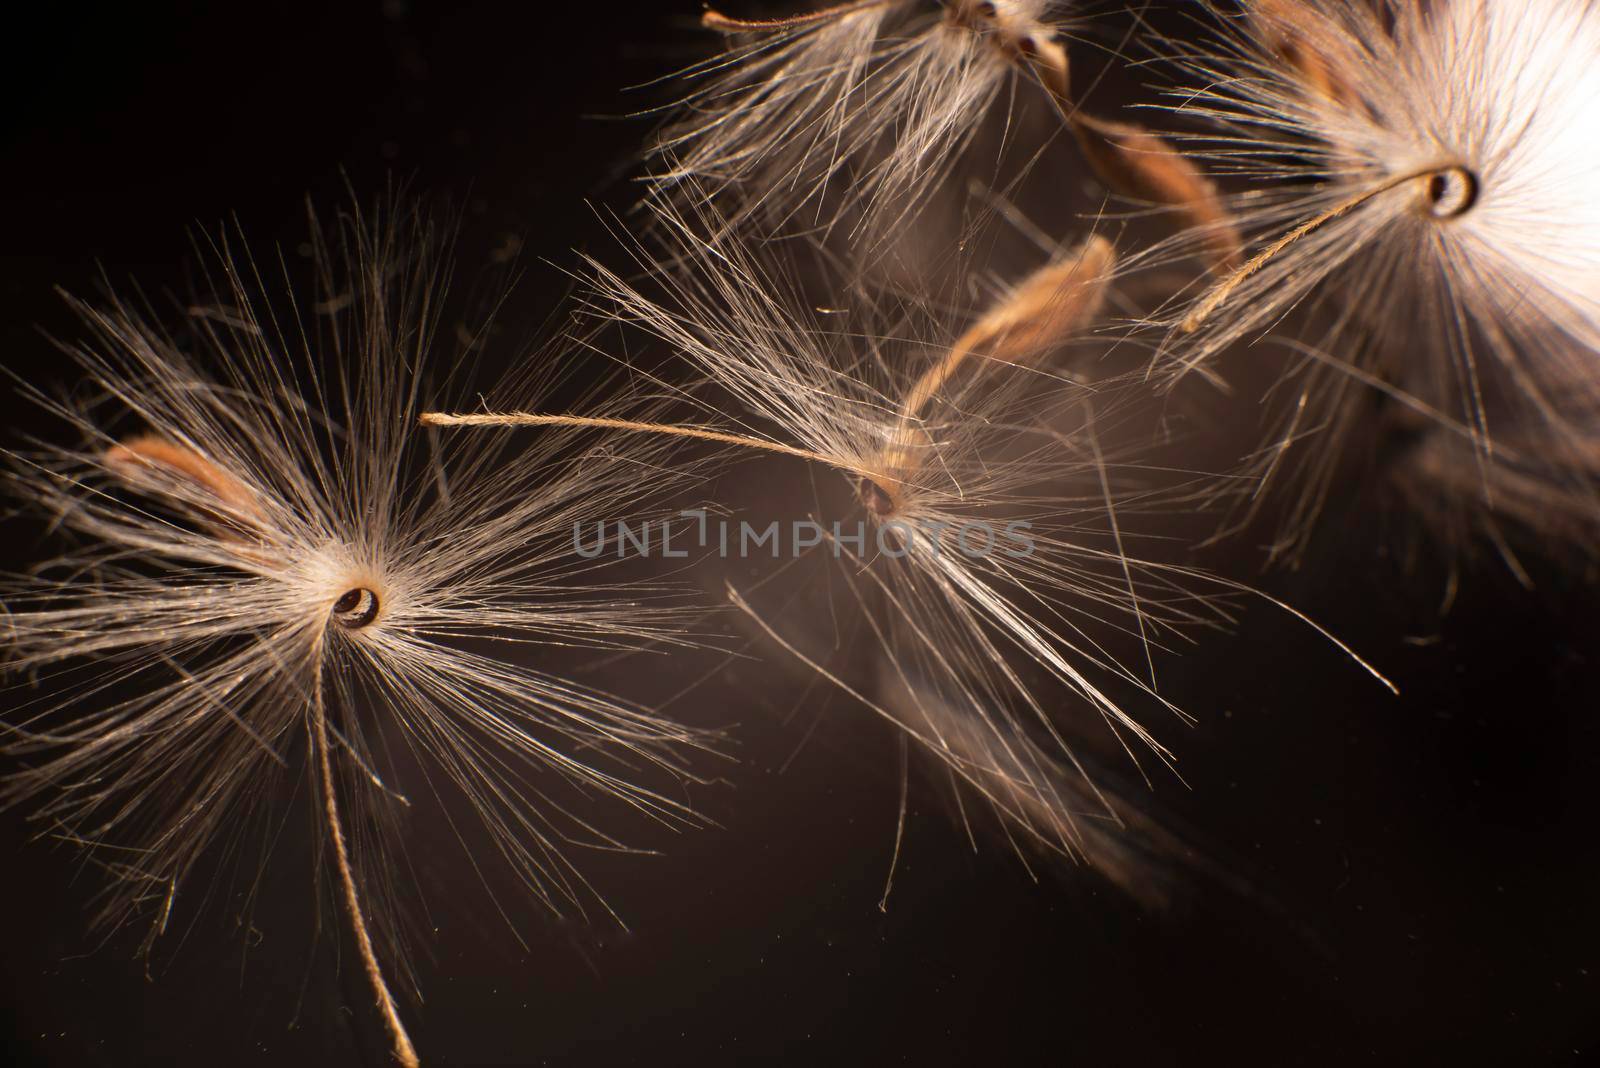 Brightly lit Pelargonium seeds, with fluffy hairs and a spiral body, are reflected in black perspex. Geranium seeds that look like ballerina ballet dancers. Motes of dust shine in the background like a constellation of stars by avirozen